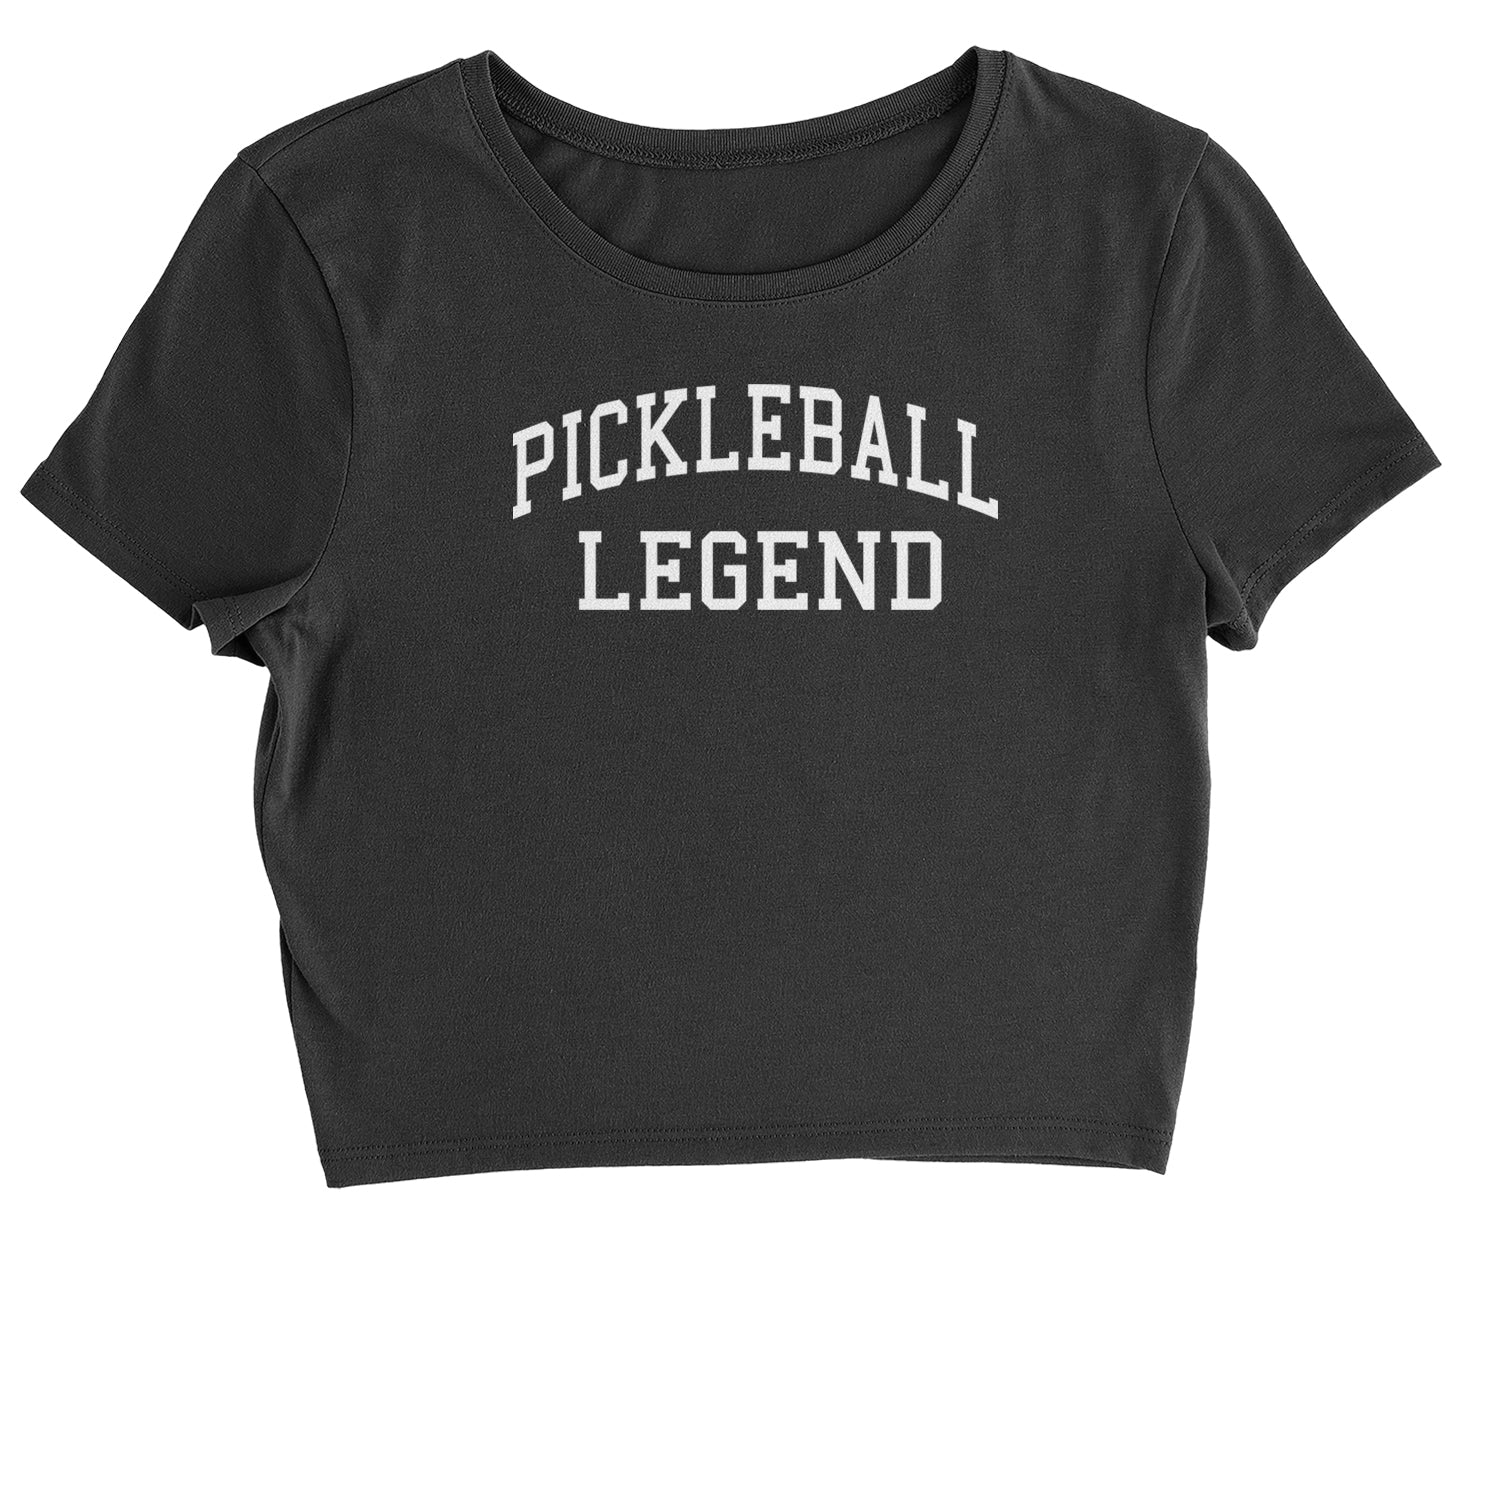 Pickleball Legend Cropped T-Shirt ball, dink, dinking, pickle, pickleball by Expression Tees